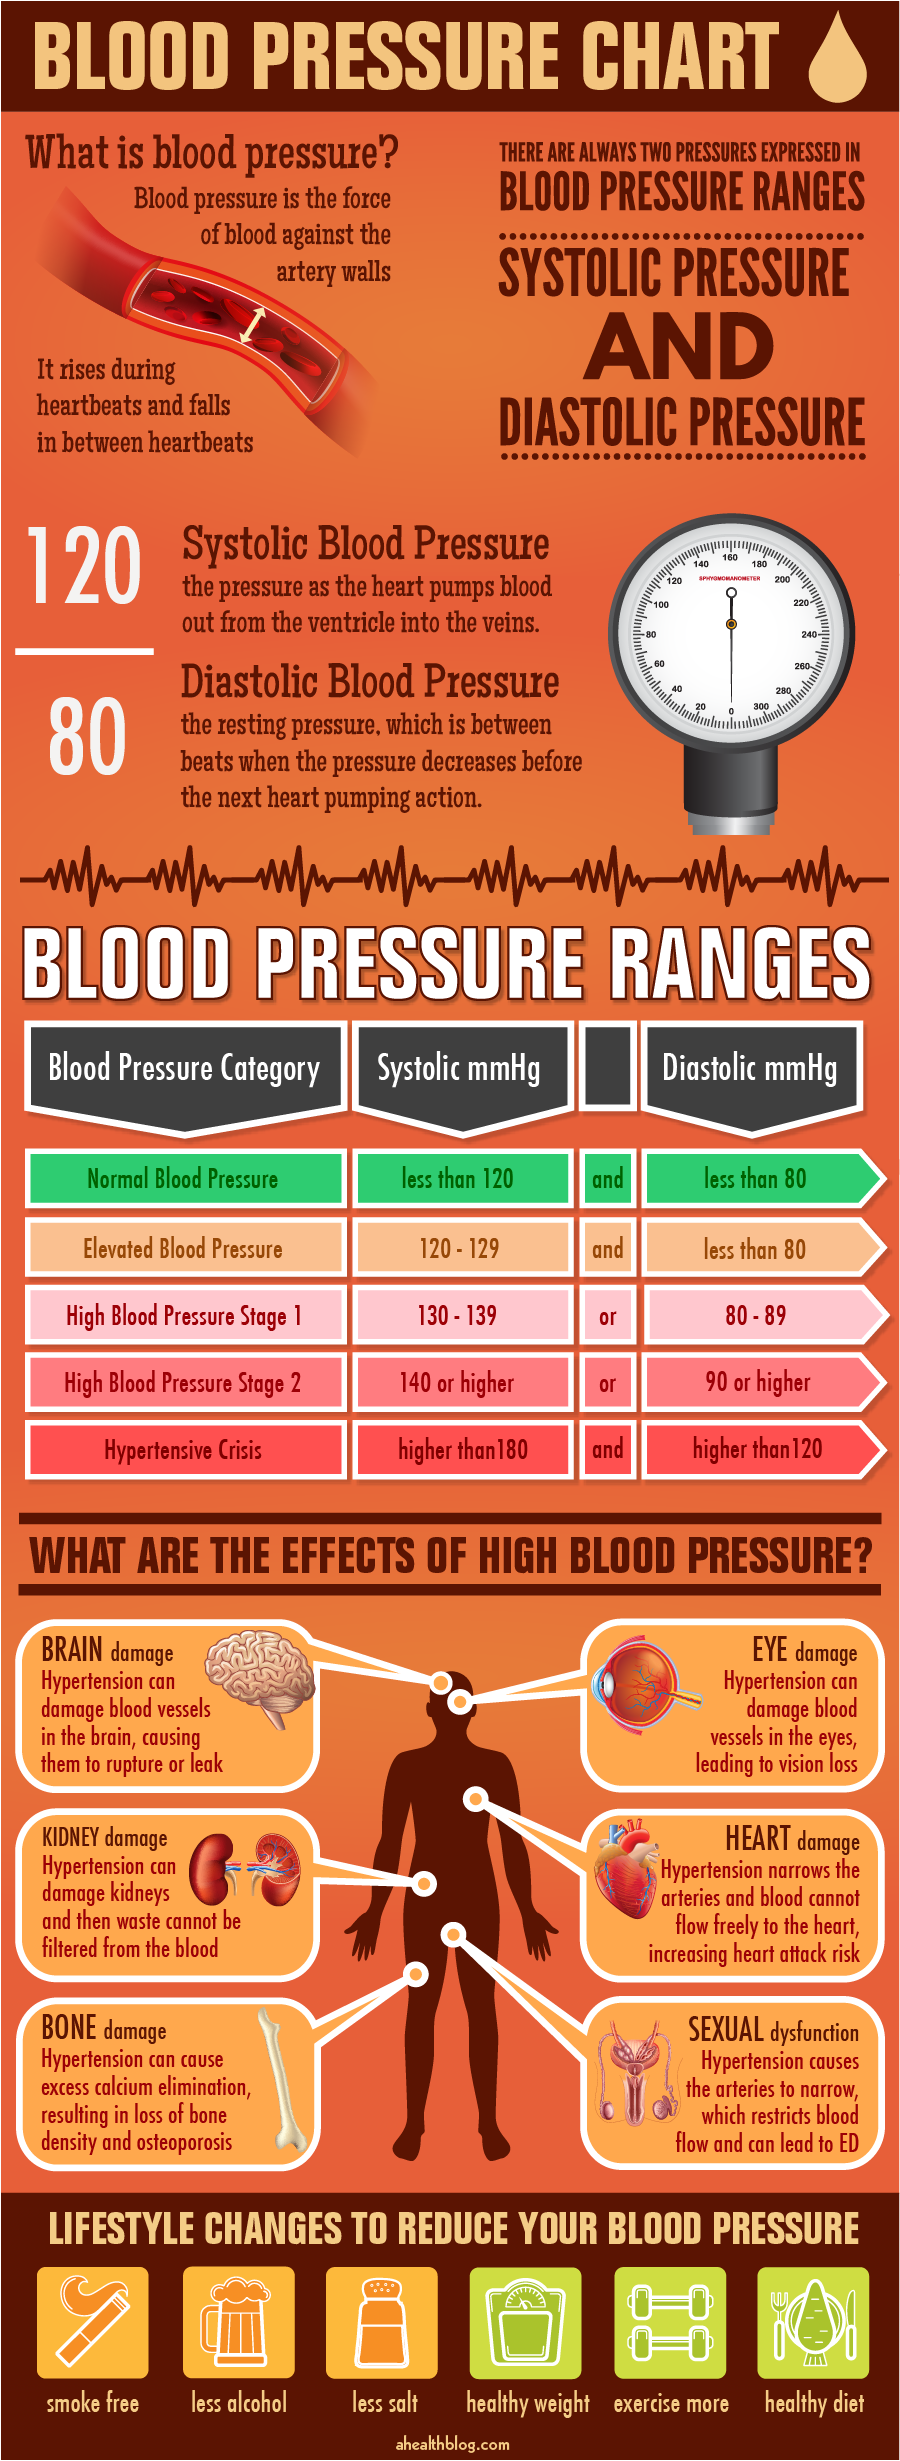 What Is The Blood Pressure Chart